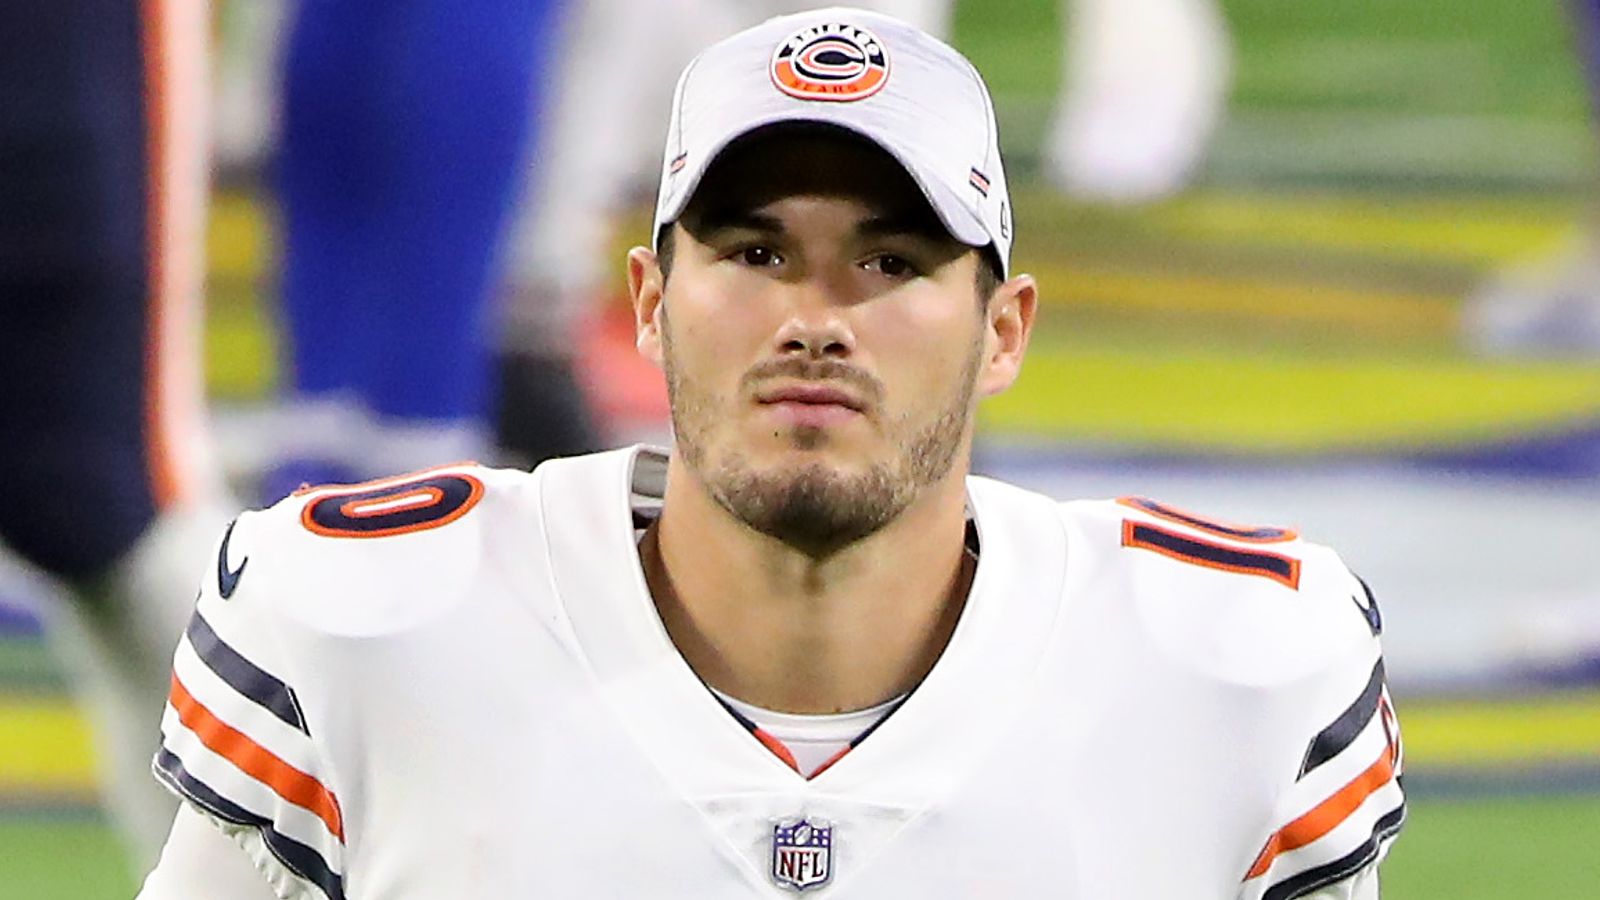 Mitchell Trubisky Chicago Bears Quarterback To Start For Week 12 Trip To Green Bay Packers 6021